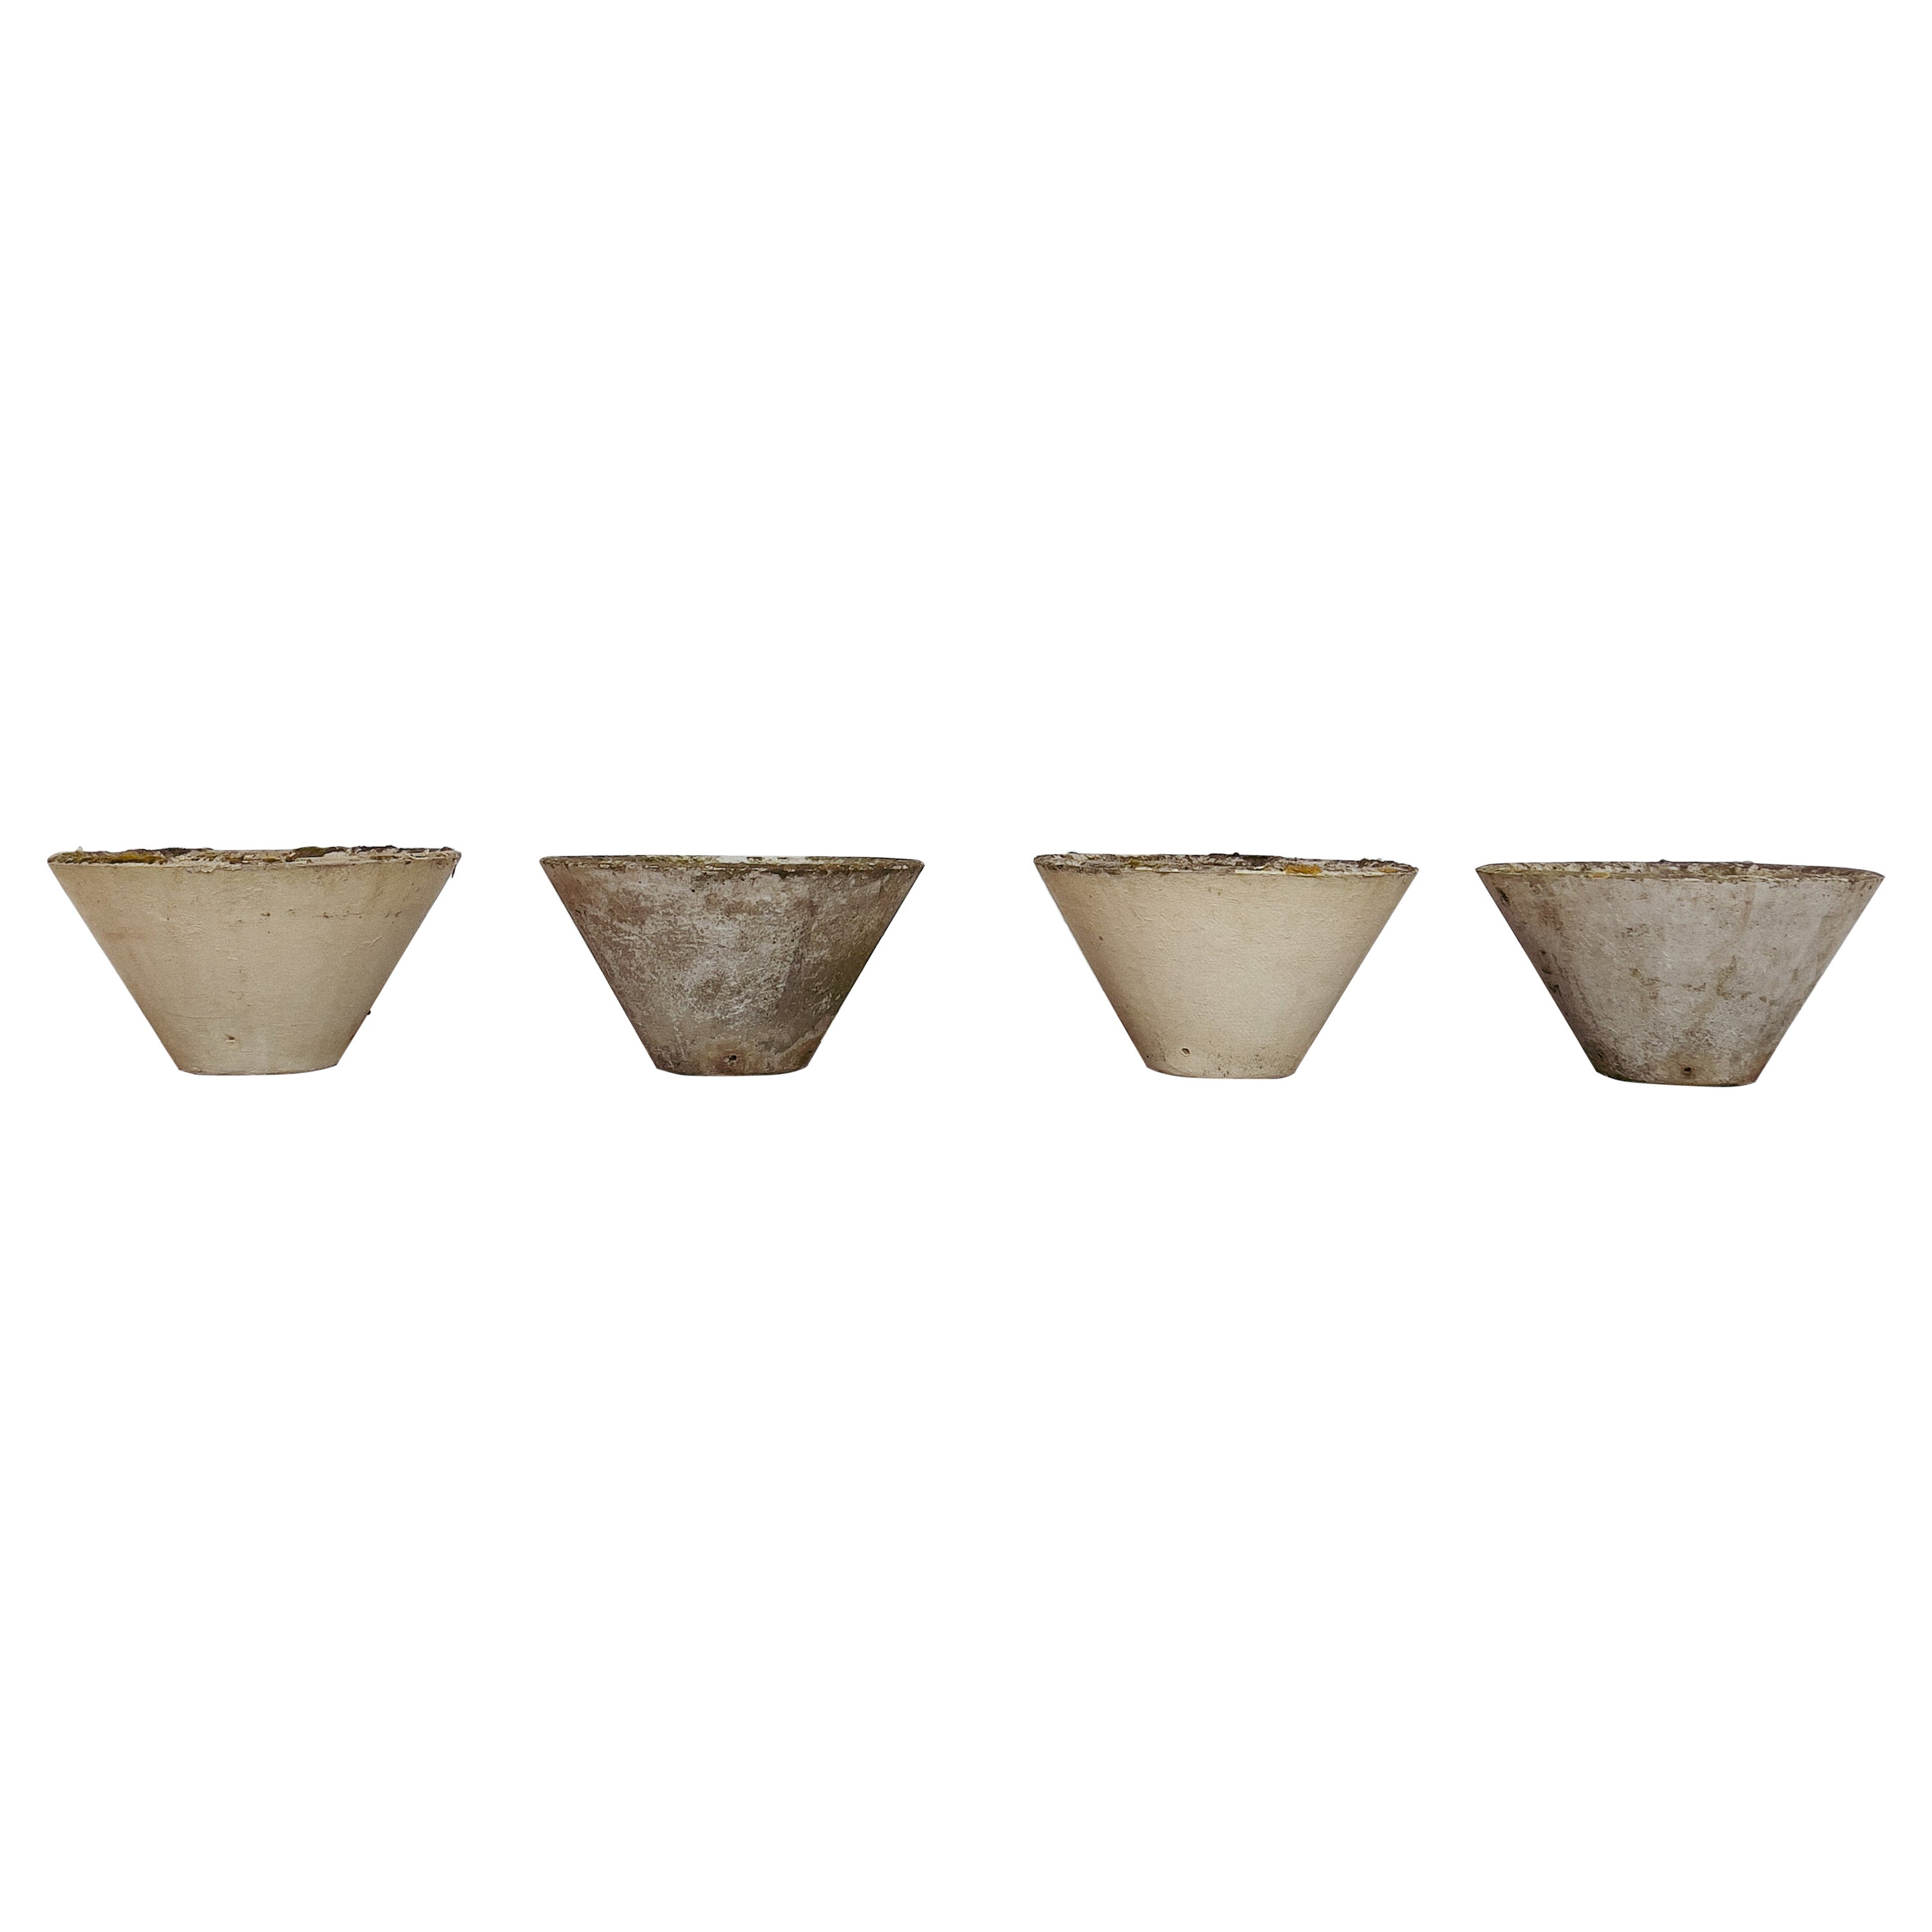 Set of 4 Willy Guhl Planters, 1950 For Sale